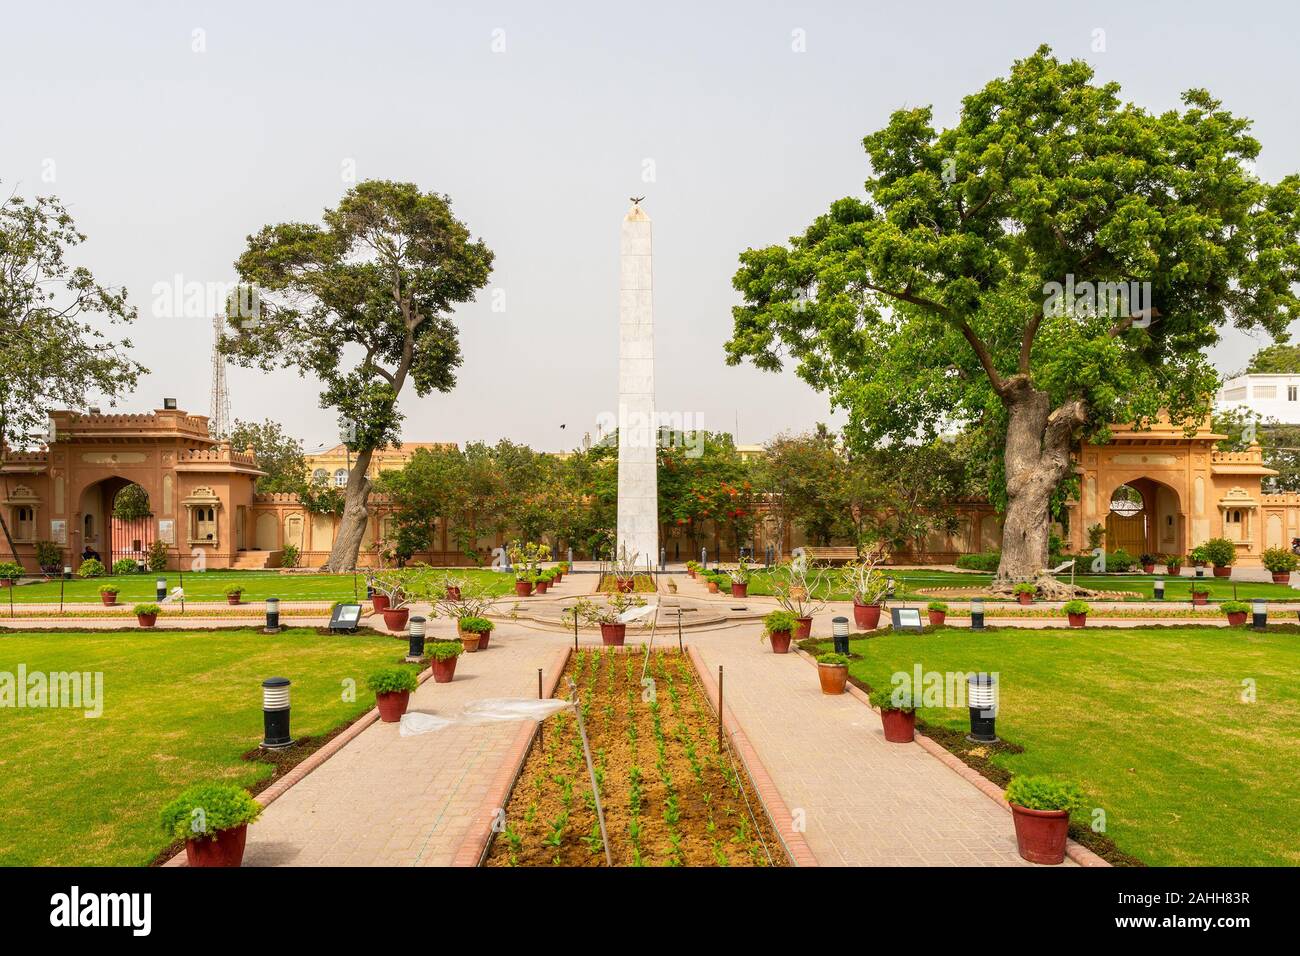 Karachi Mohatta Palace Museum Picturesque View of Garden Obelisk at Hatim Alvi Road on a Cloudy Day Stock Photo